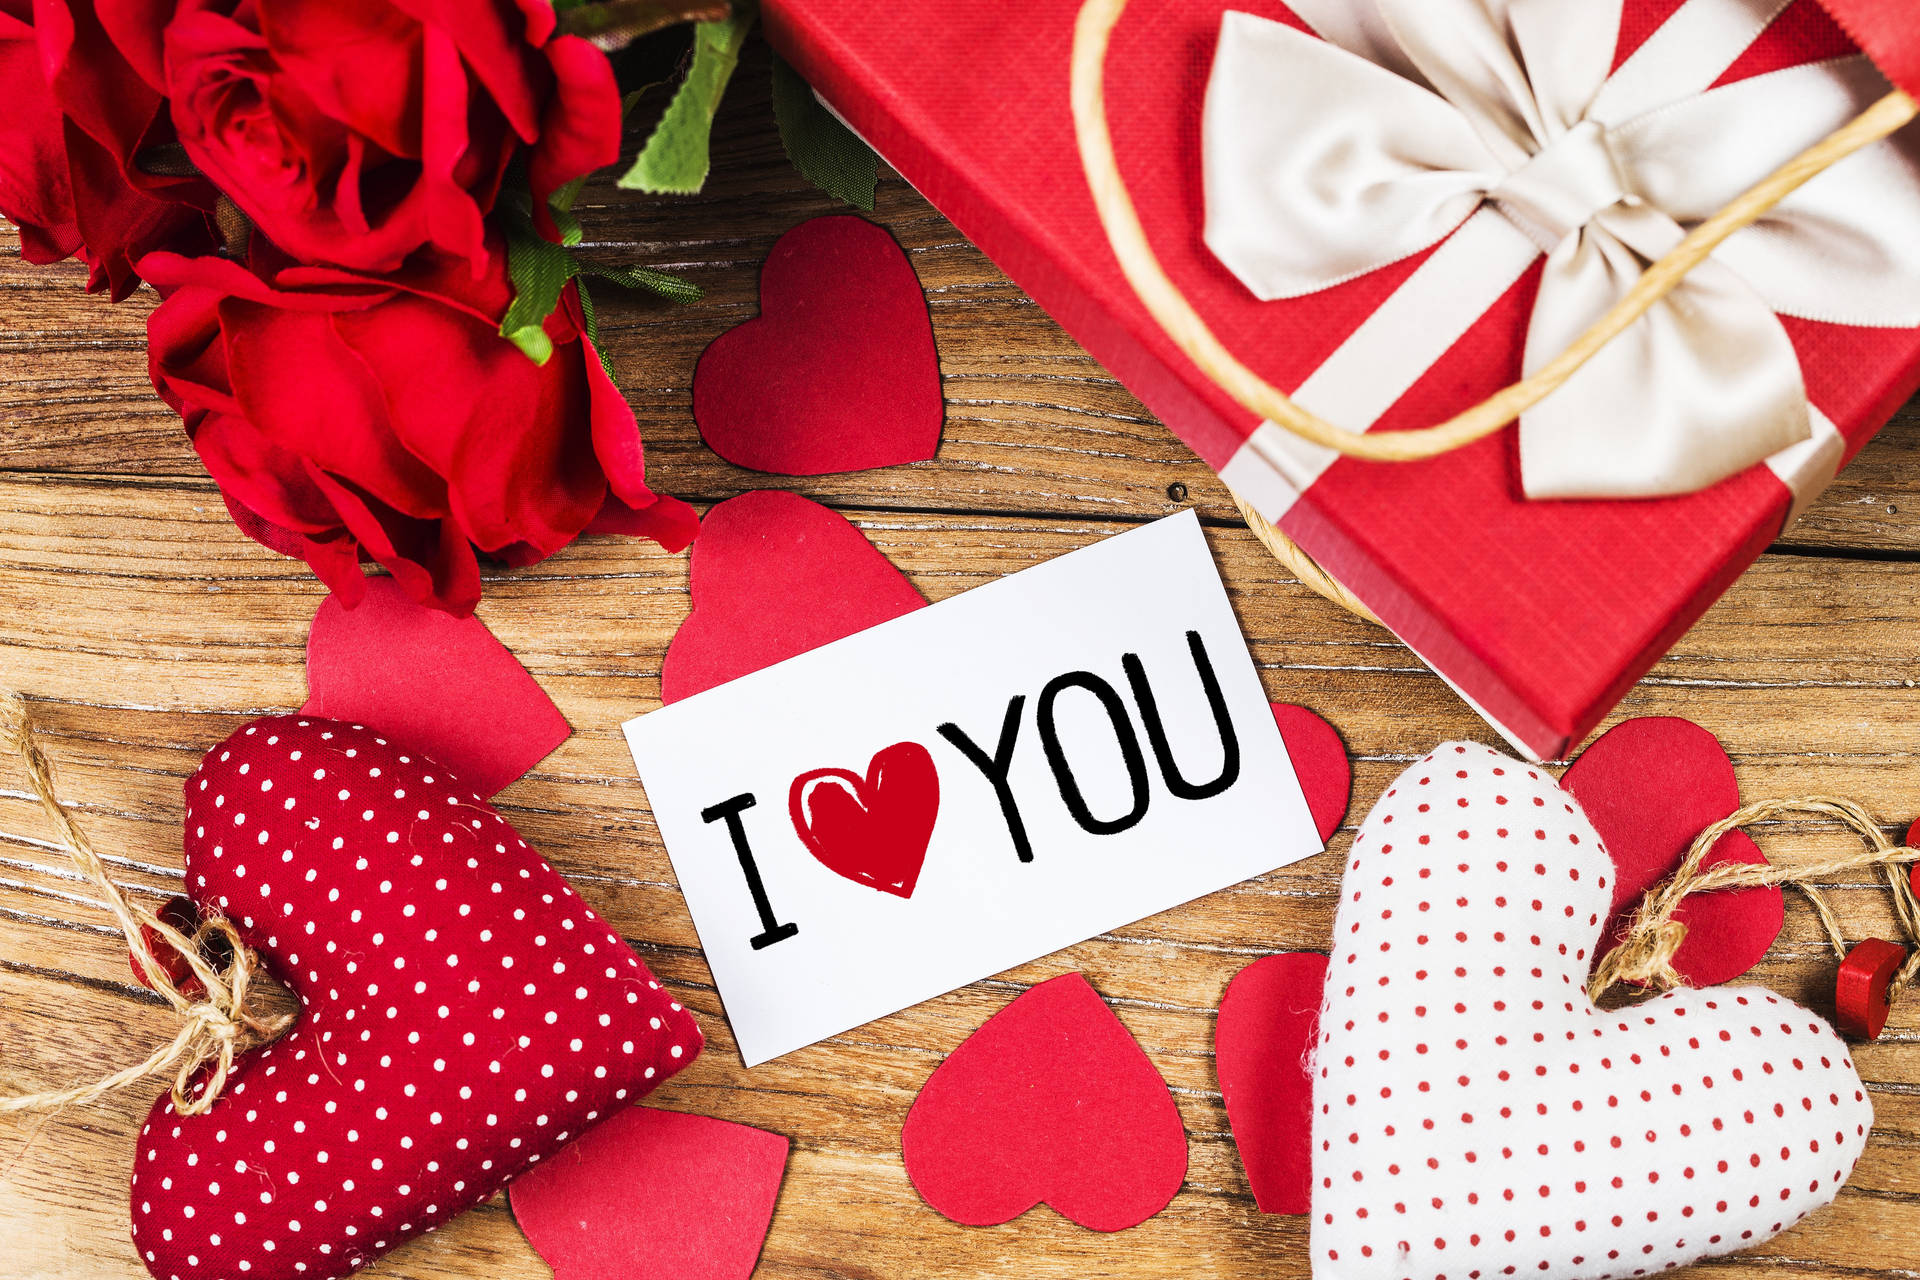 Romantic Love Flowers And Gifts Wallpaper